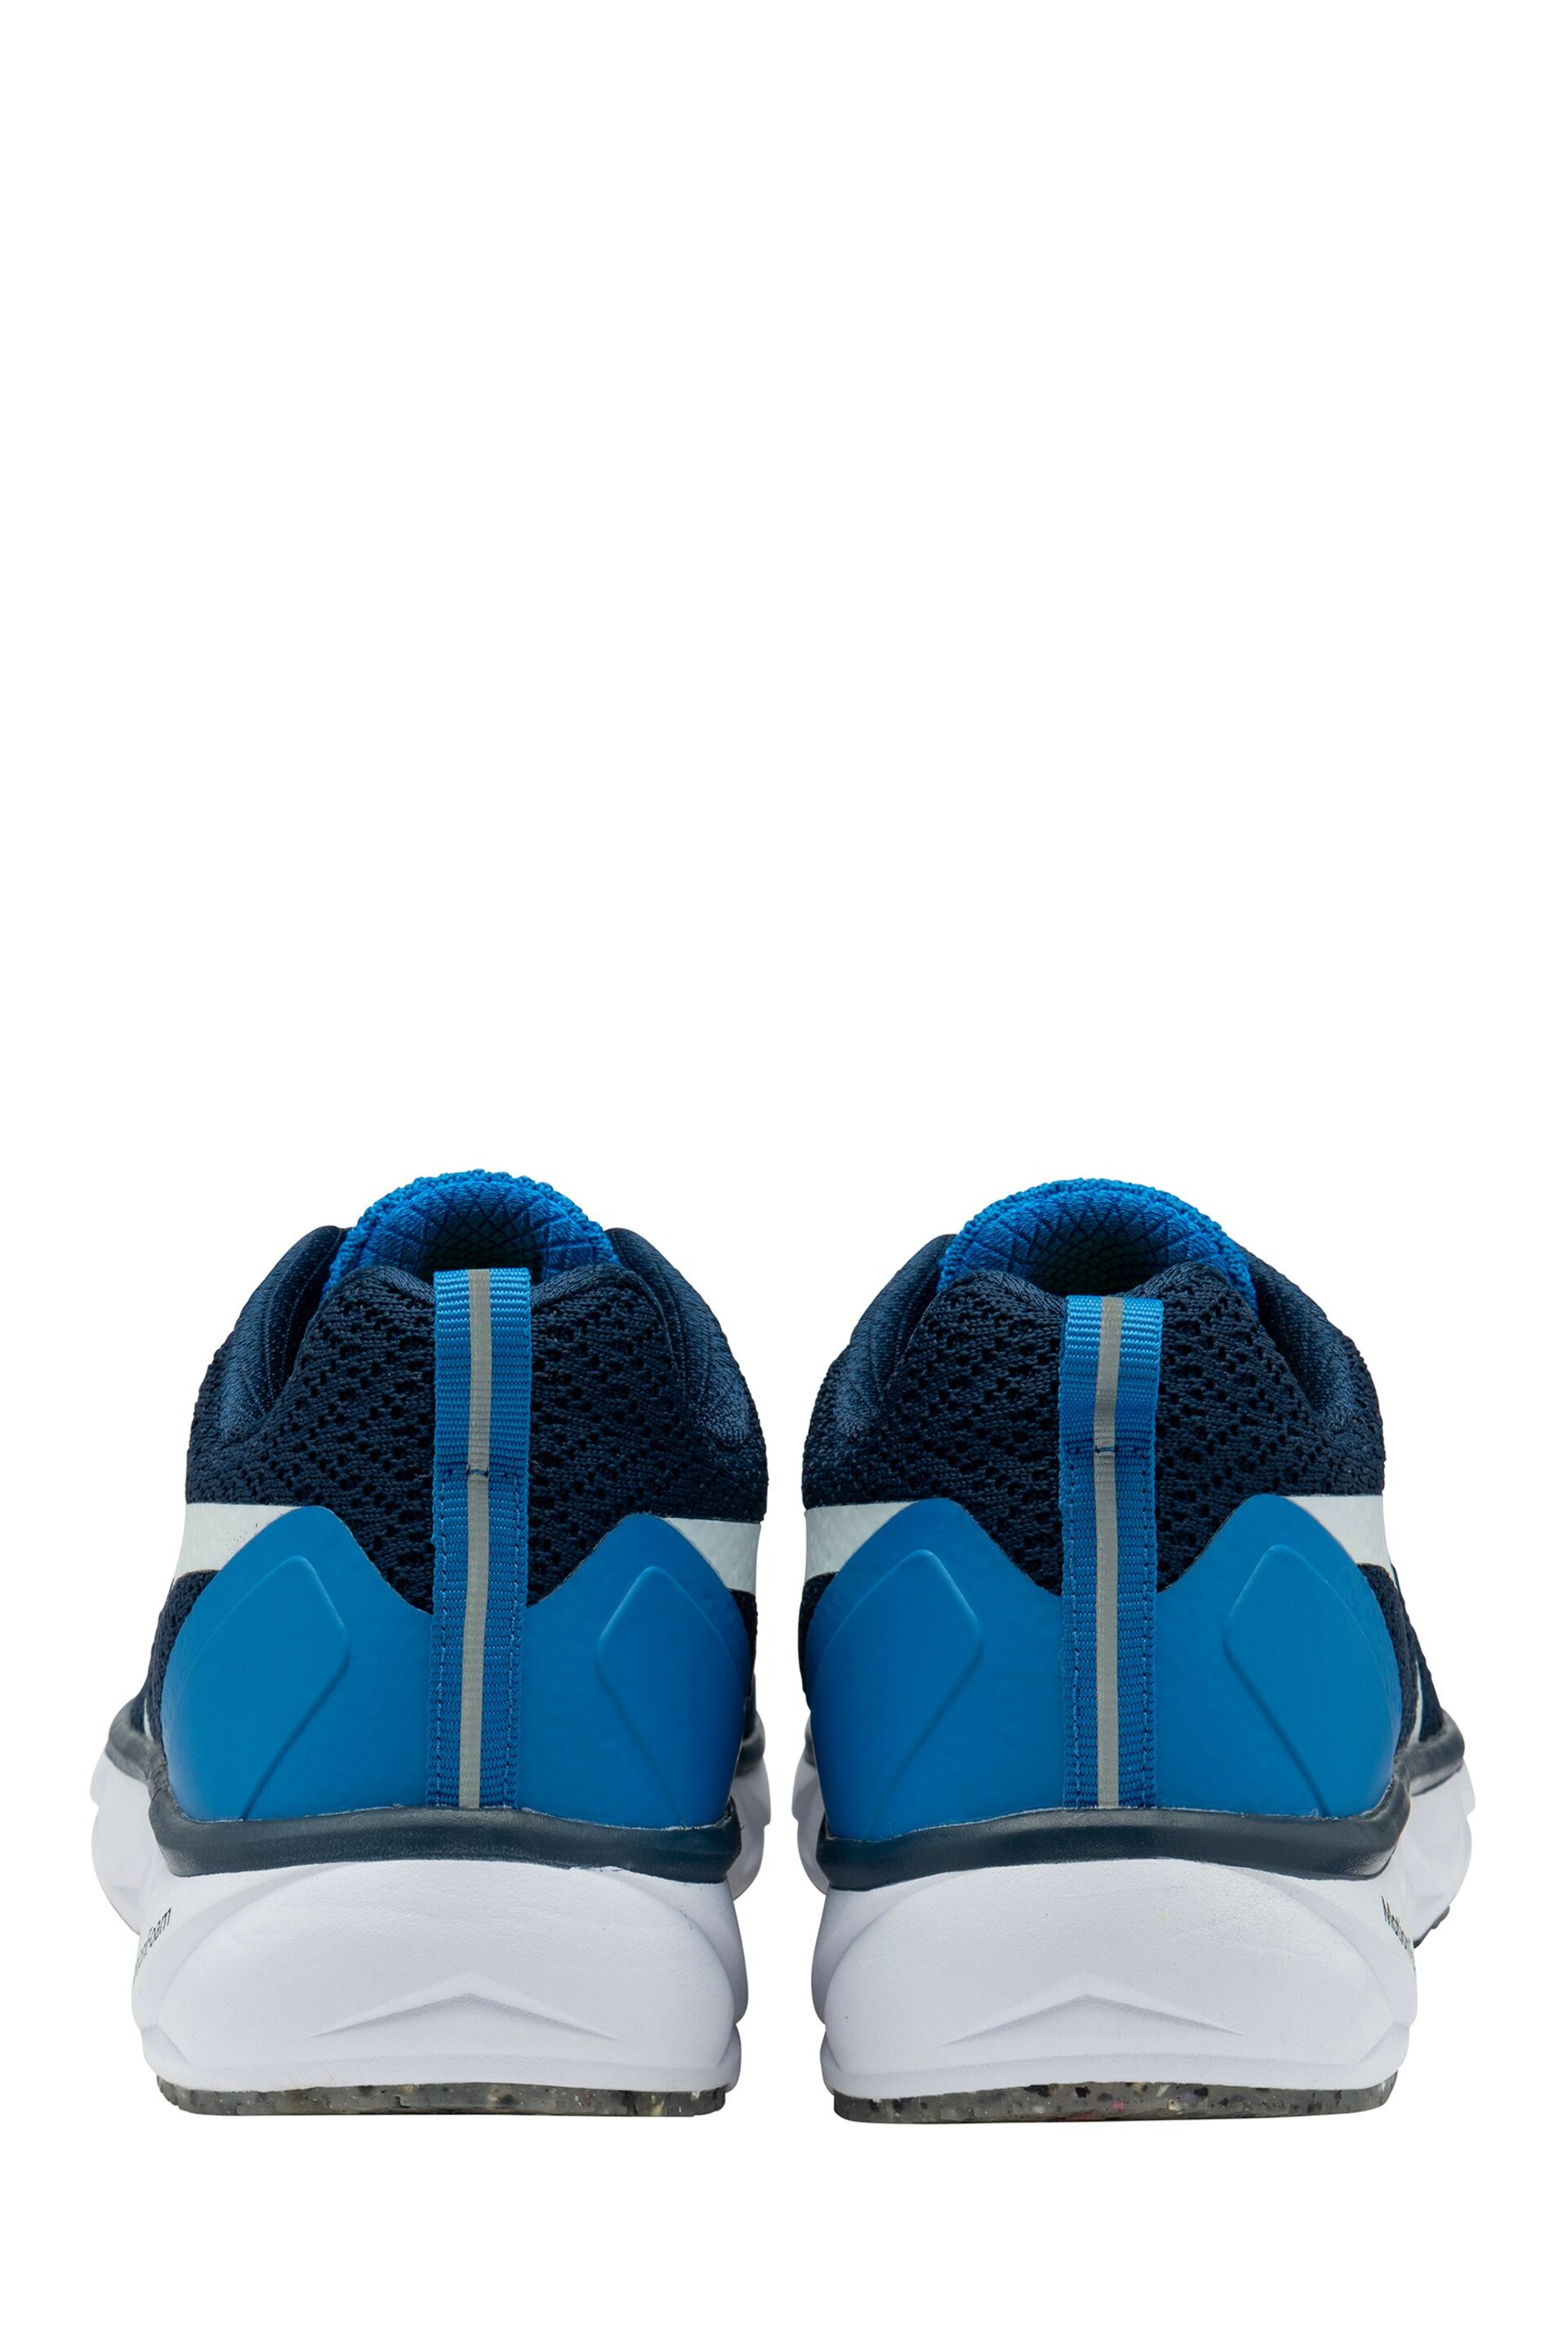 Gola Blue Typhoon RMD Mesh Lace-Up Mens Running Trainers - Image 3 of 4